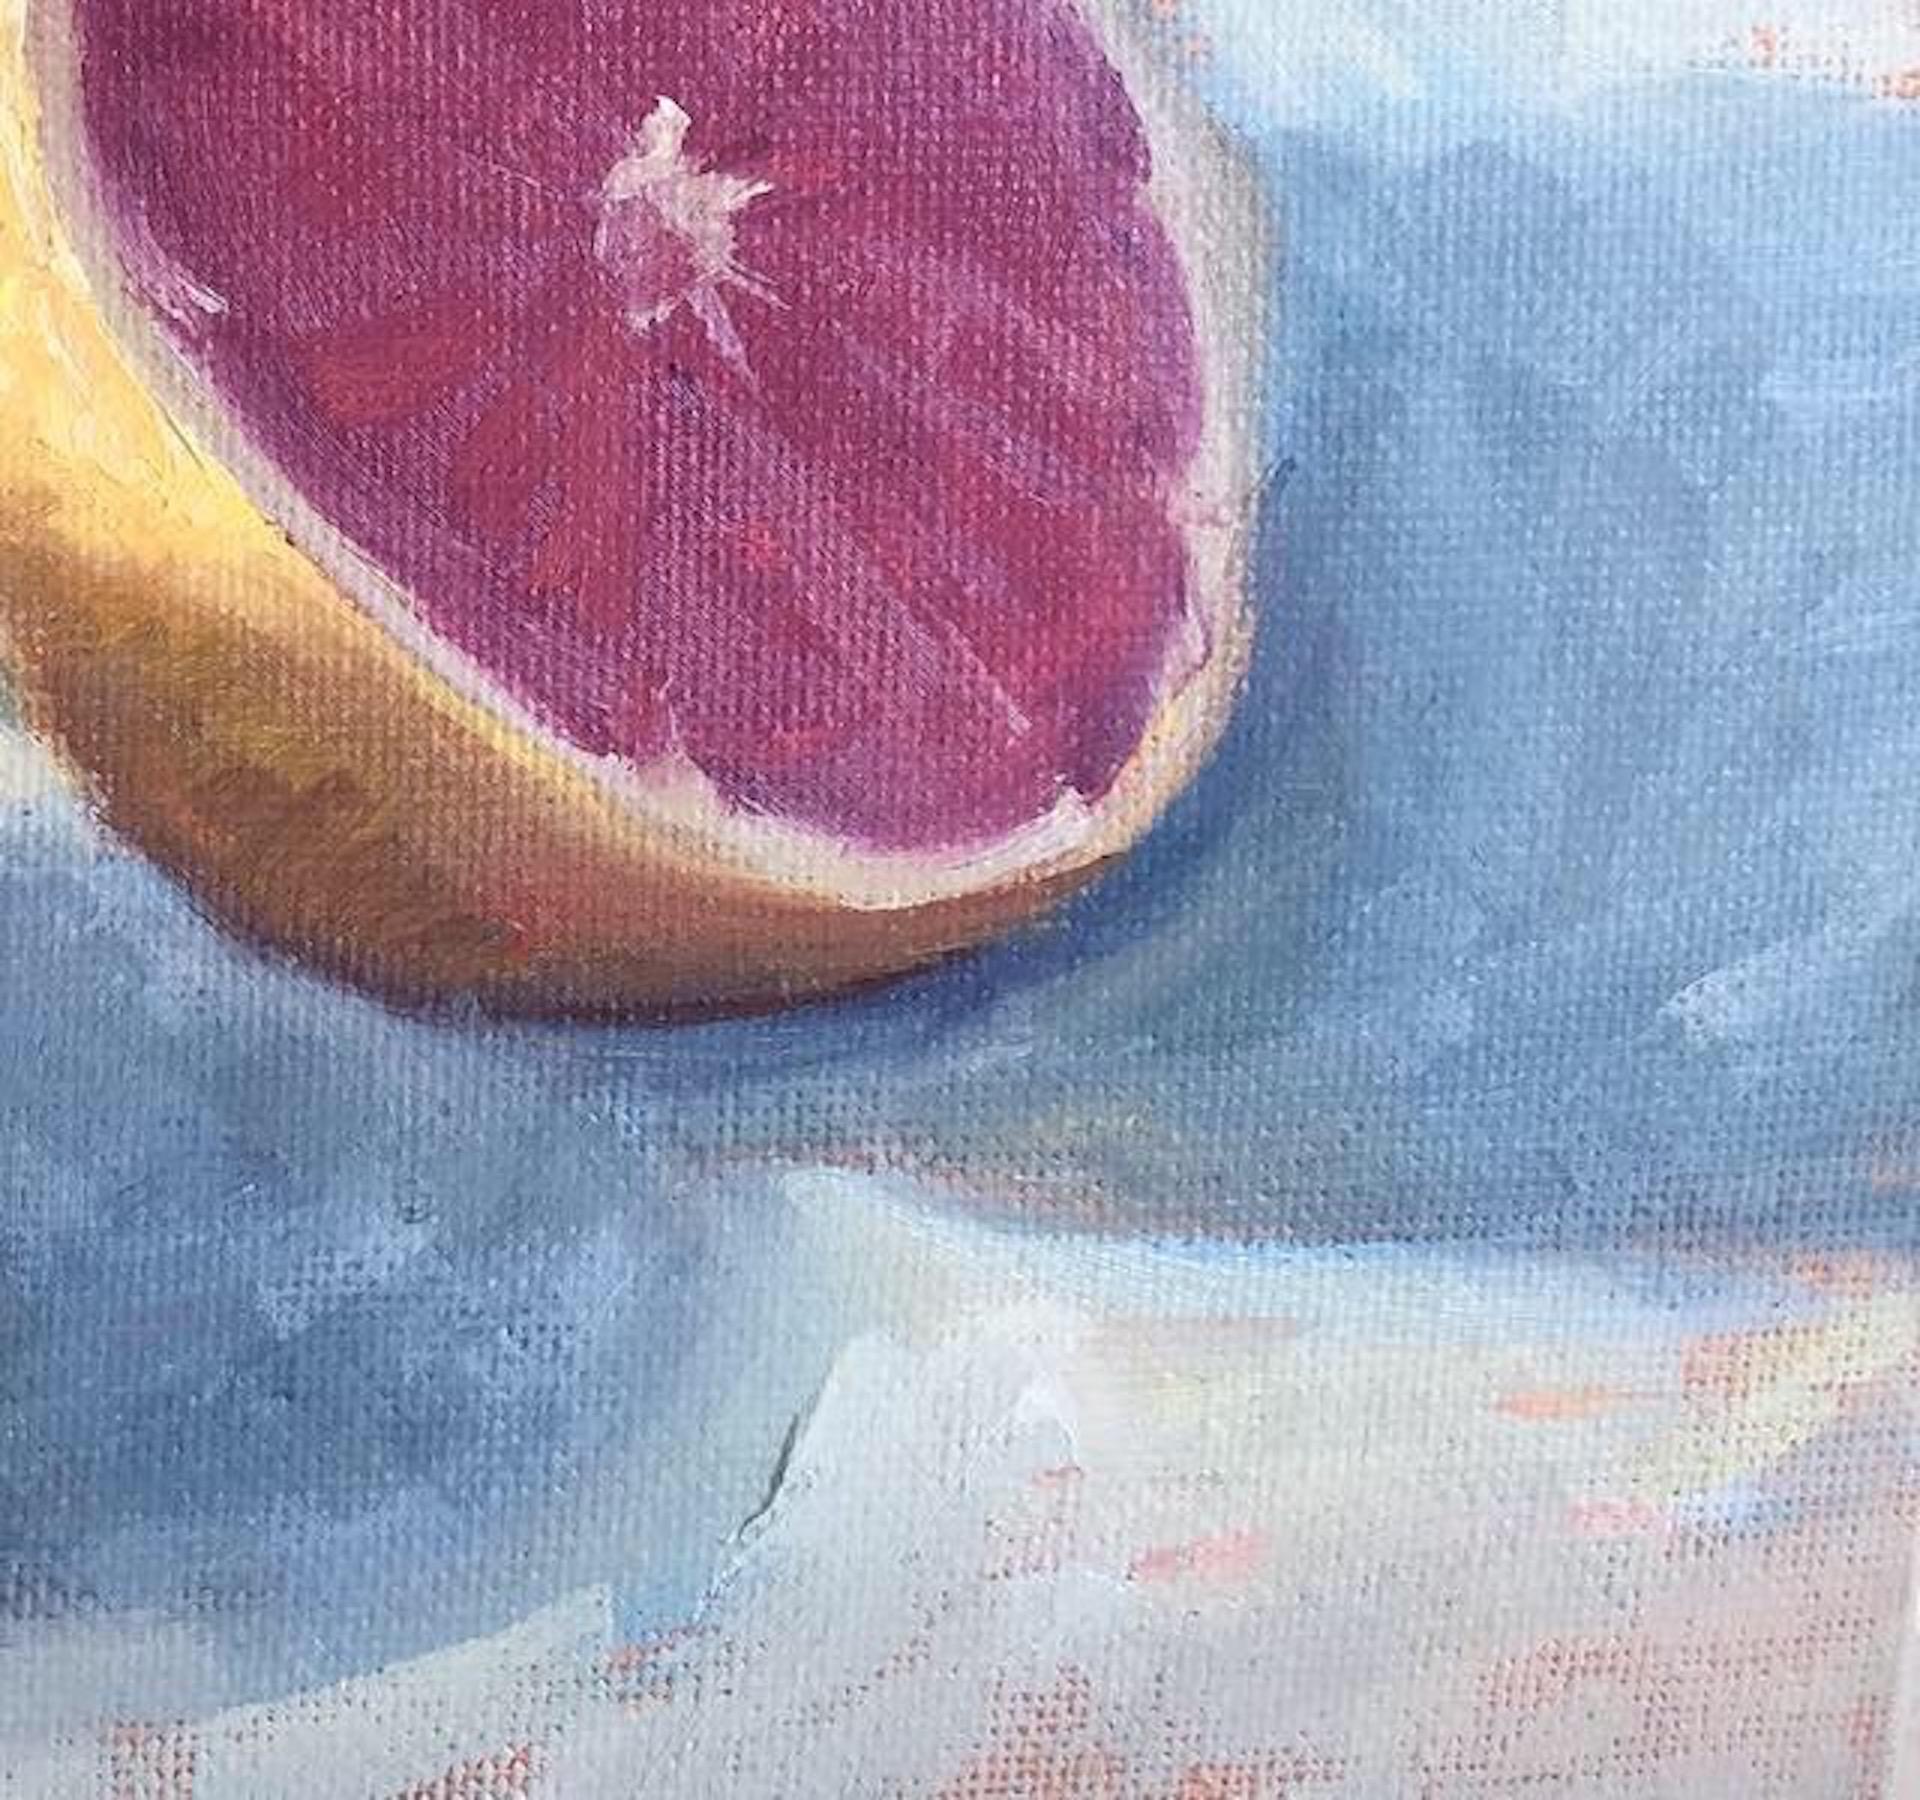 Benedict Flanagan
Grapefruit
Original Cityscape Painting
Oil Paint on Board
Board Size: H 20.3cm x W 25.4cm x D 0.5cm
Sold Unframed
Please note that in situ images are purely an indication of how a piece may look.

Grapefruit is a still life